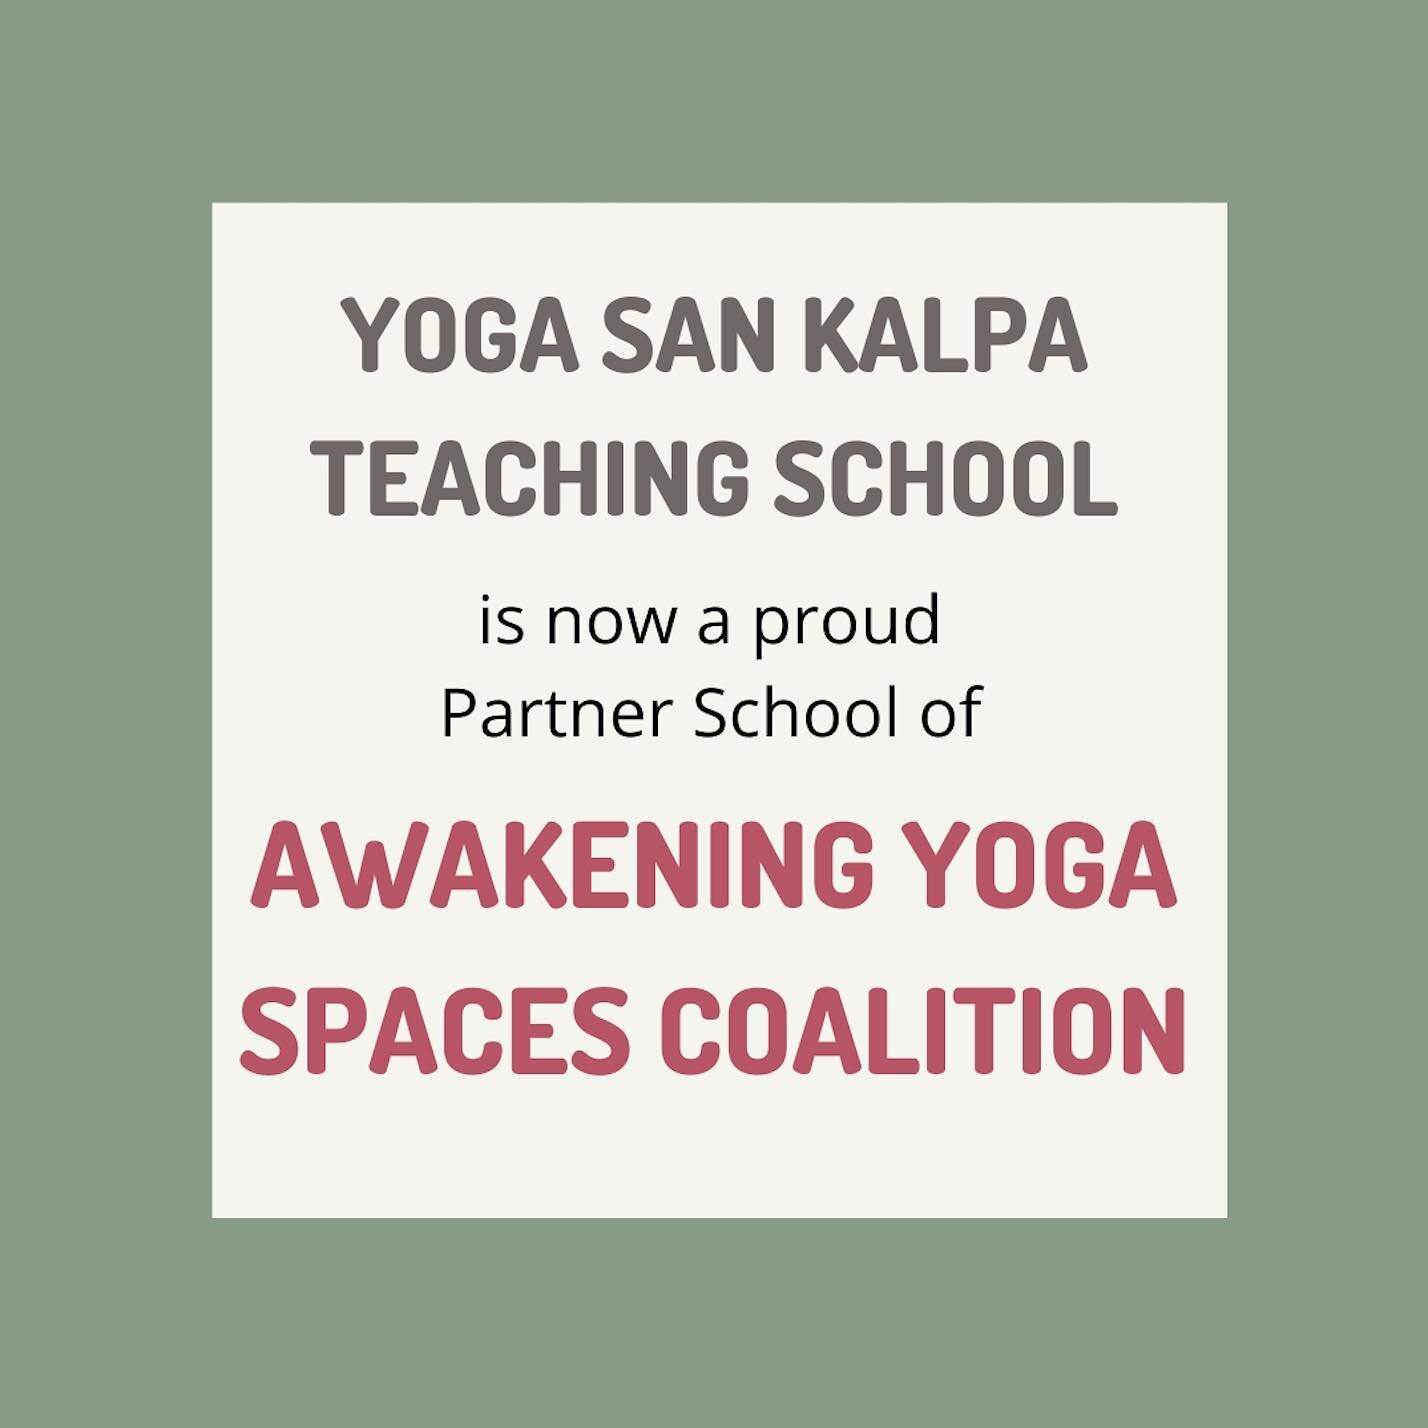 We are excited to announce that we have been accepted as one the partner yoga schools for the Awakening Yoga Spaces Coalition. ⁣
⁣
Awakening Yoga Spaces is a coalition of yoga and wellness communities committed to diversity, equity, and inclusion in 